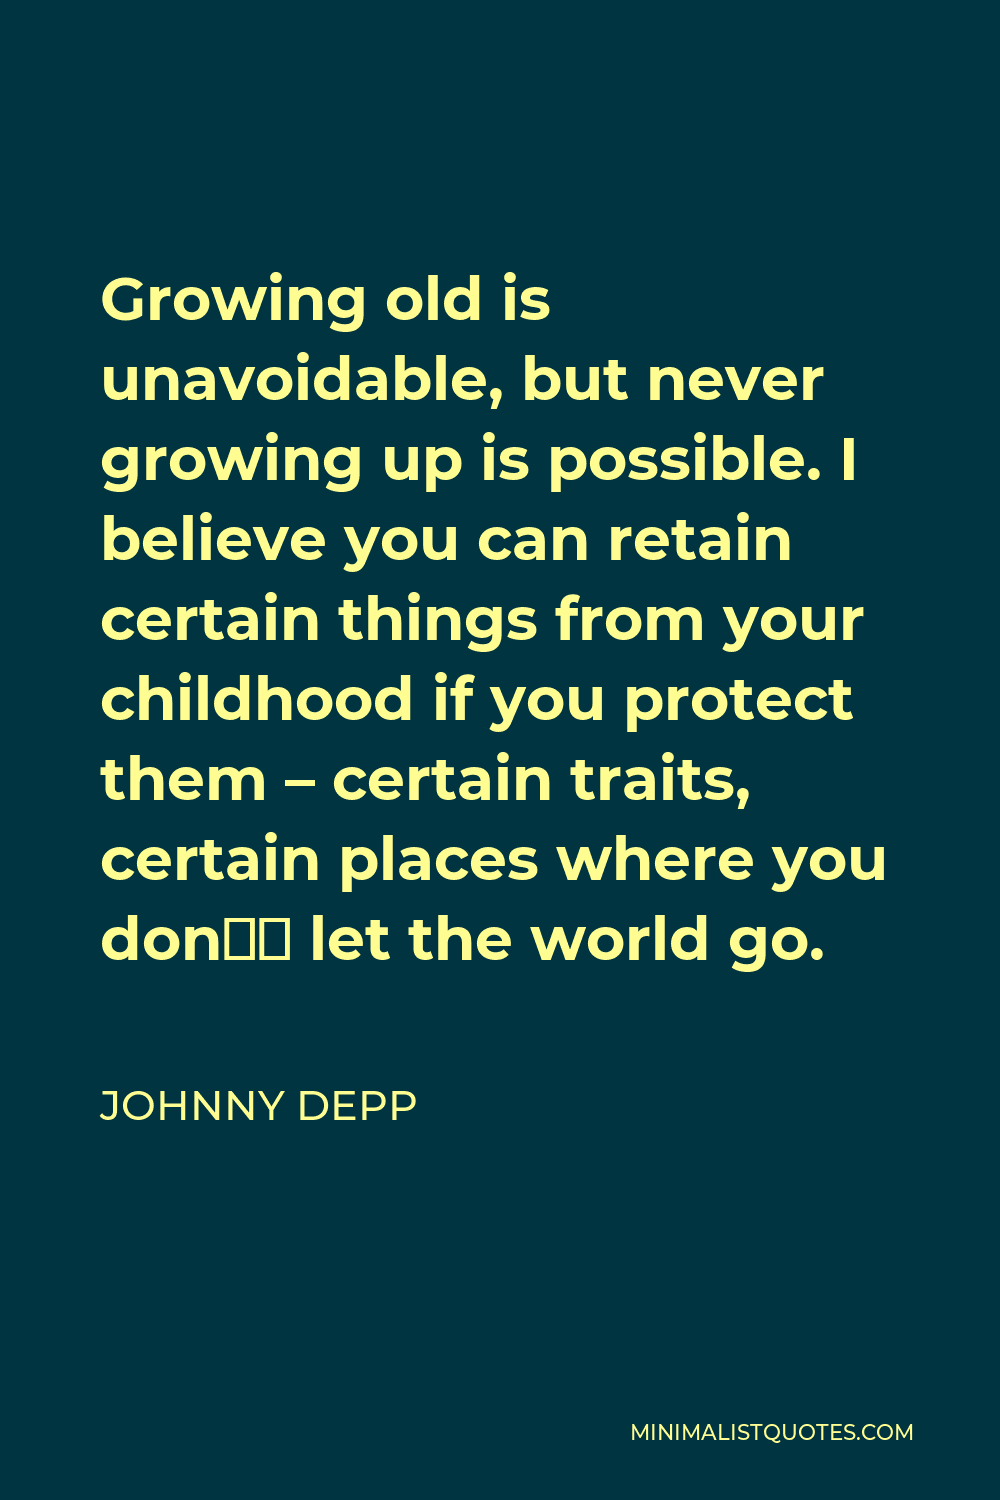 Johnny Depp Quote - Growing old is unavoidable, but never growing up is possible. I believe you can retain certain things from your childhood if you protect them – certain traits, certain places where you don’t let the world go.